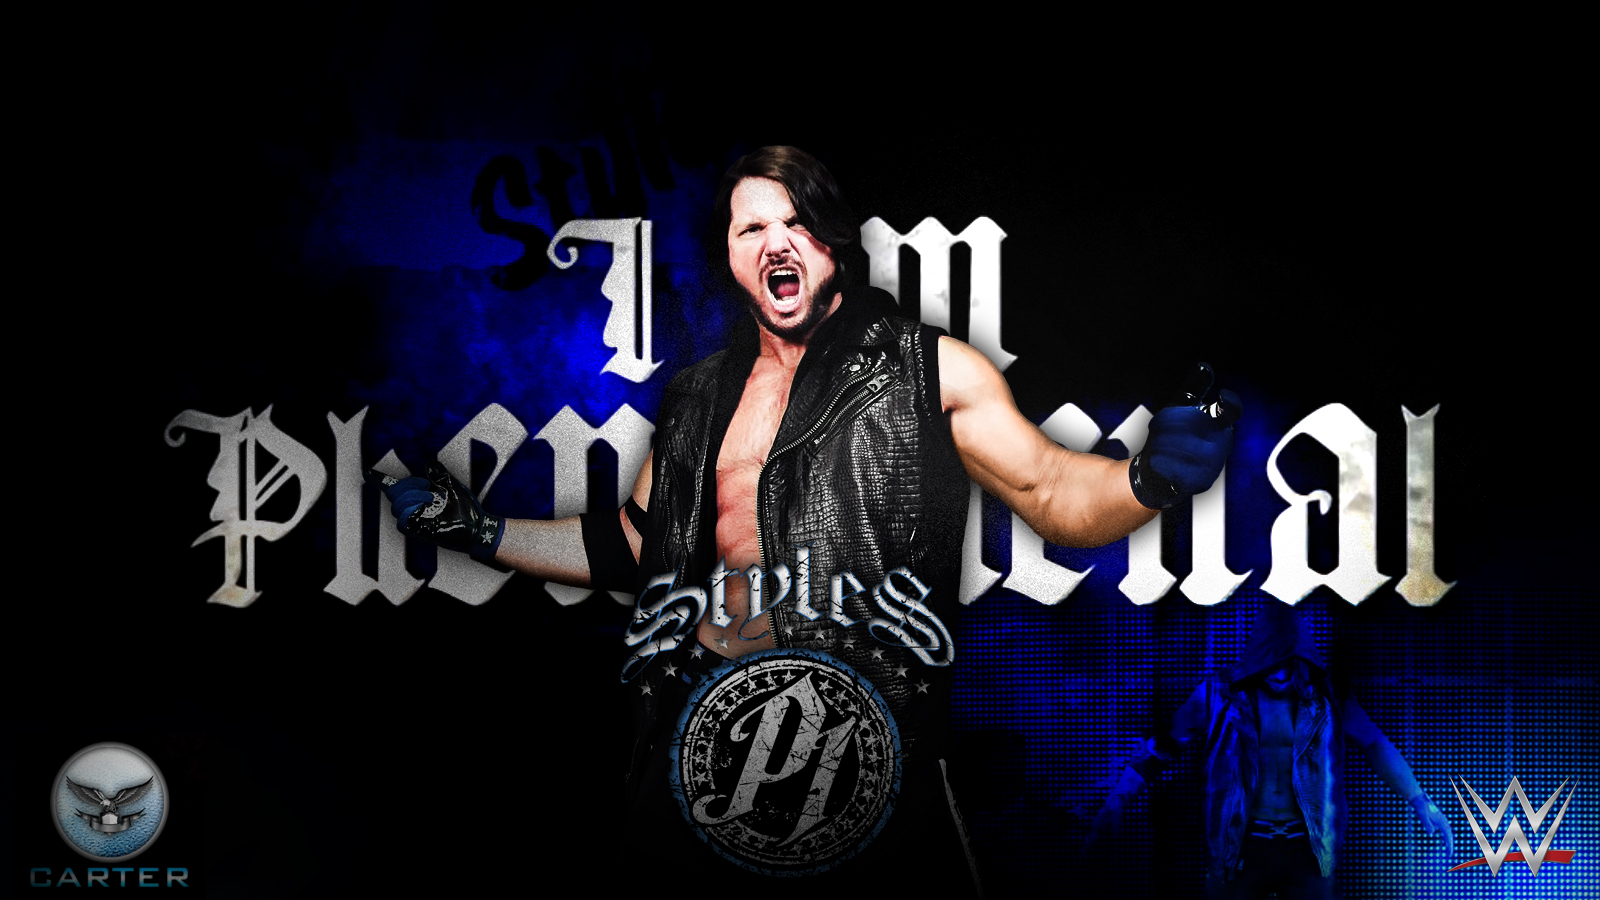 Free download AJ Styles Wallpaper 2016 by DeanMoxley on [1600x900] for your  Desktop, Mobile & Tablet | Explore 50+ AJ Styles Wallpaper 2016 | Wallpaper  Styles, WWE AJ Styles Wallpaper, Wallpaper Styles 2016